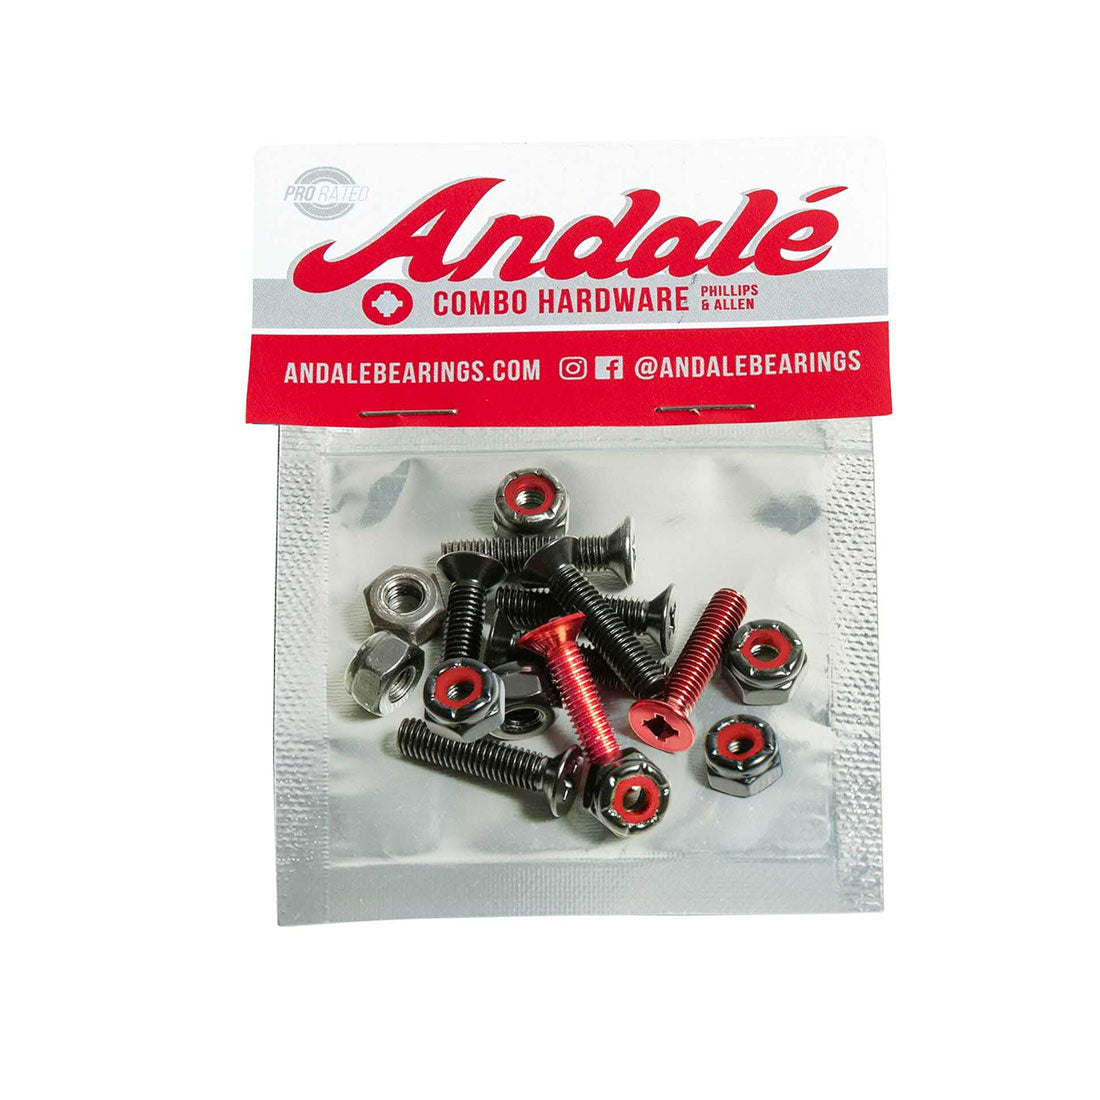 Andale 7/8in Combo Hardware 8pk - Red Skateboard Hardware and Parts